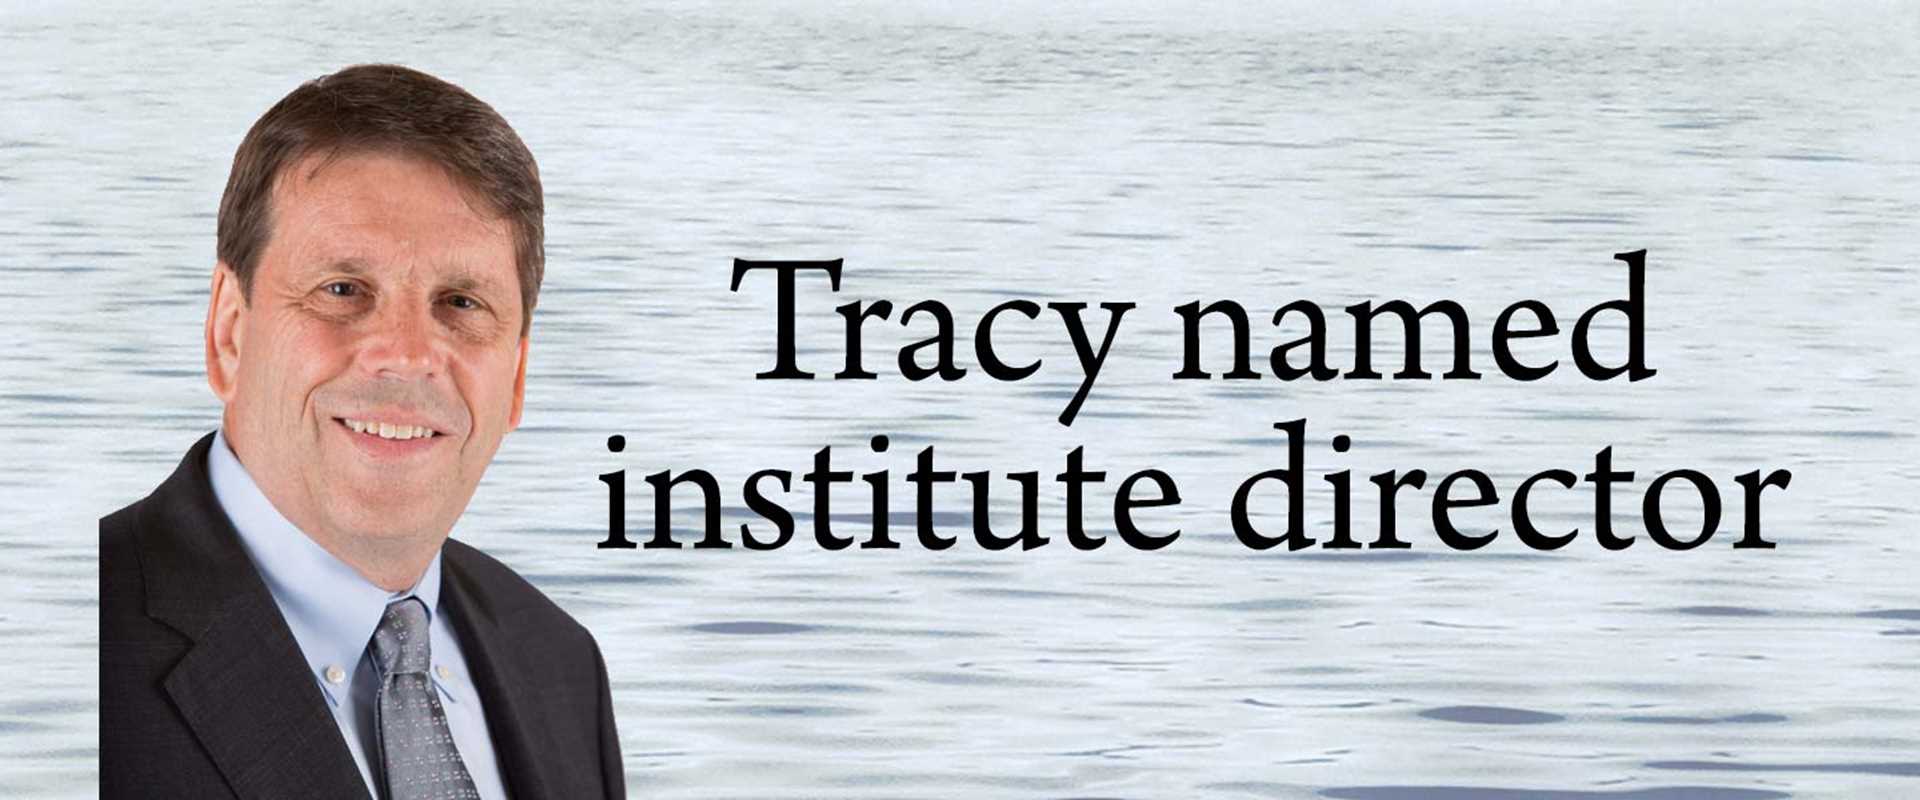 Tracy named institute director